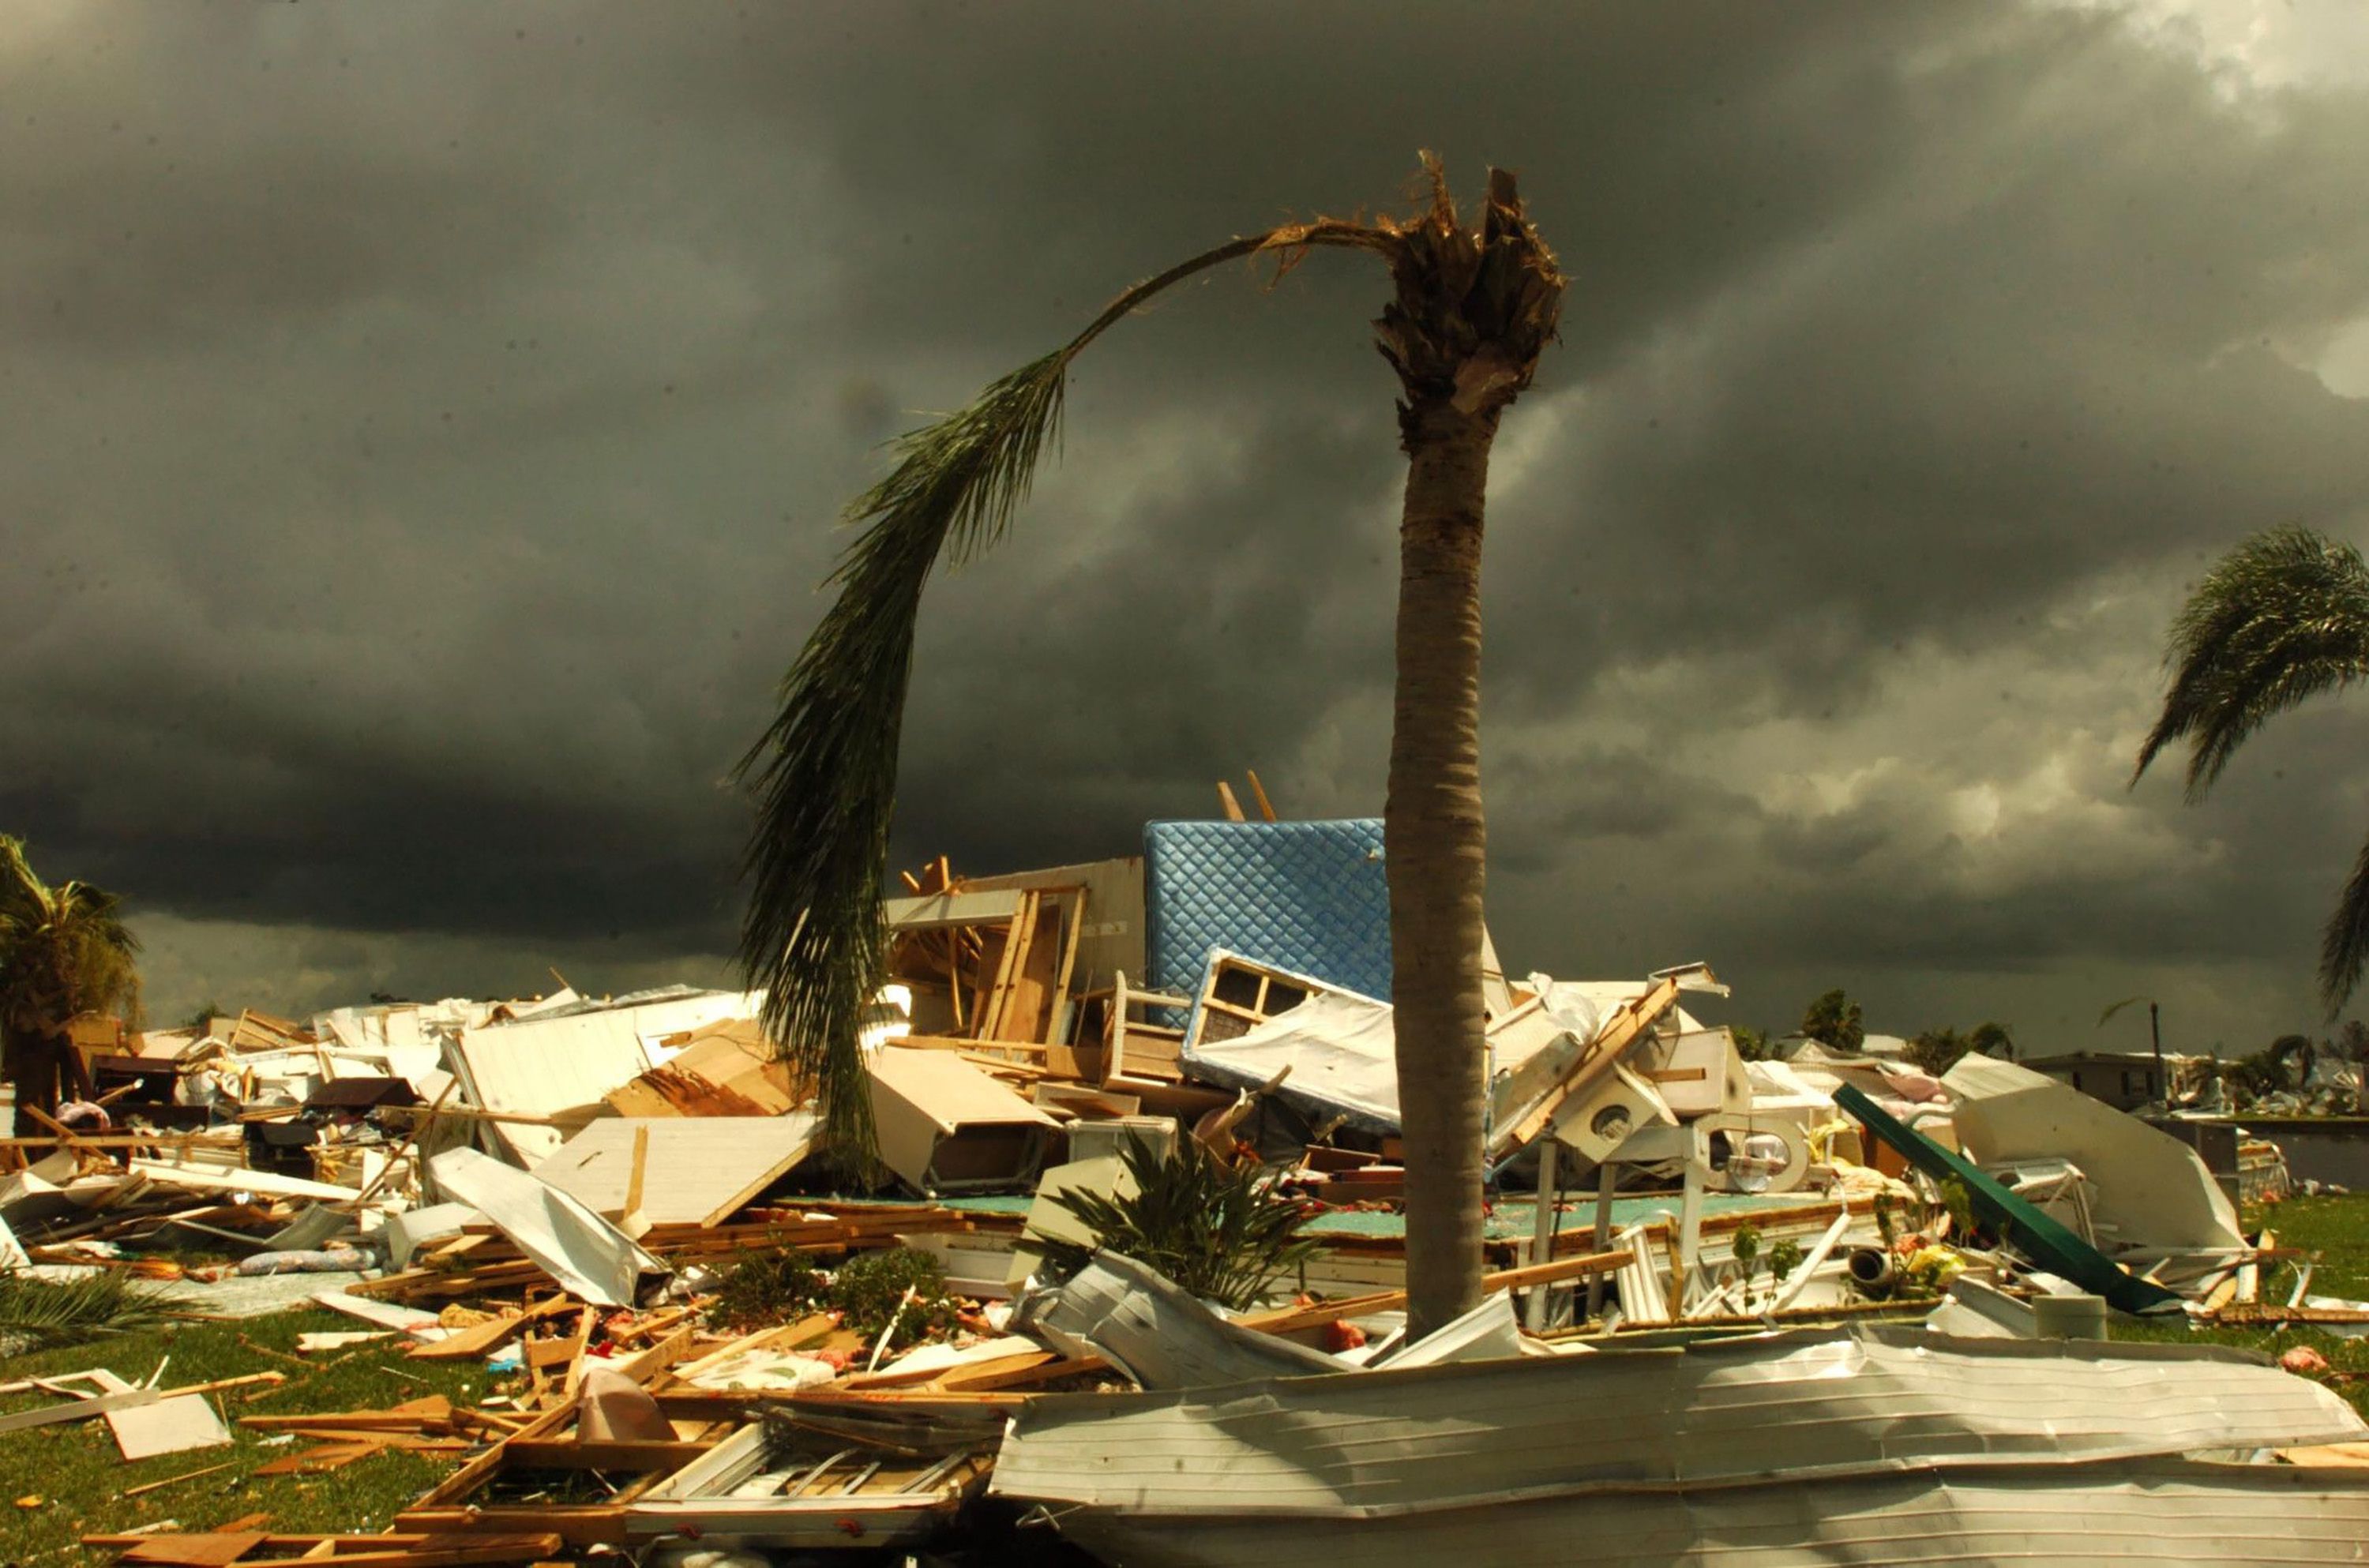 A shredded palm tree stands amongst rubble in Punta Gorda, Aug. 14, 2004, after Hurricane Charley passed through the night before